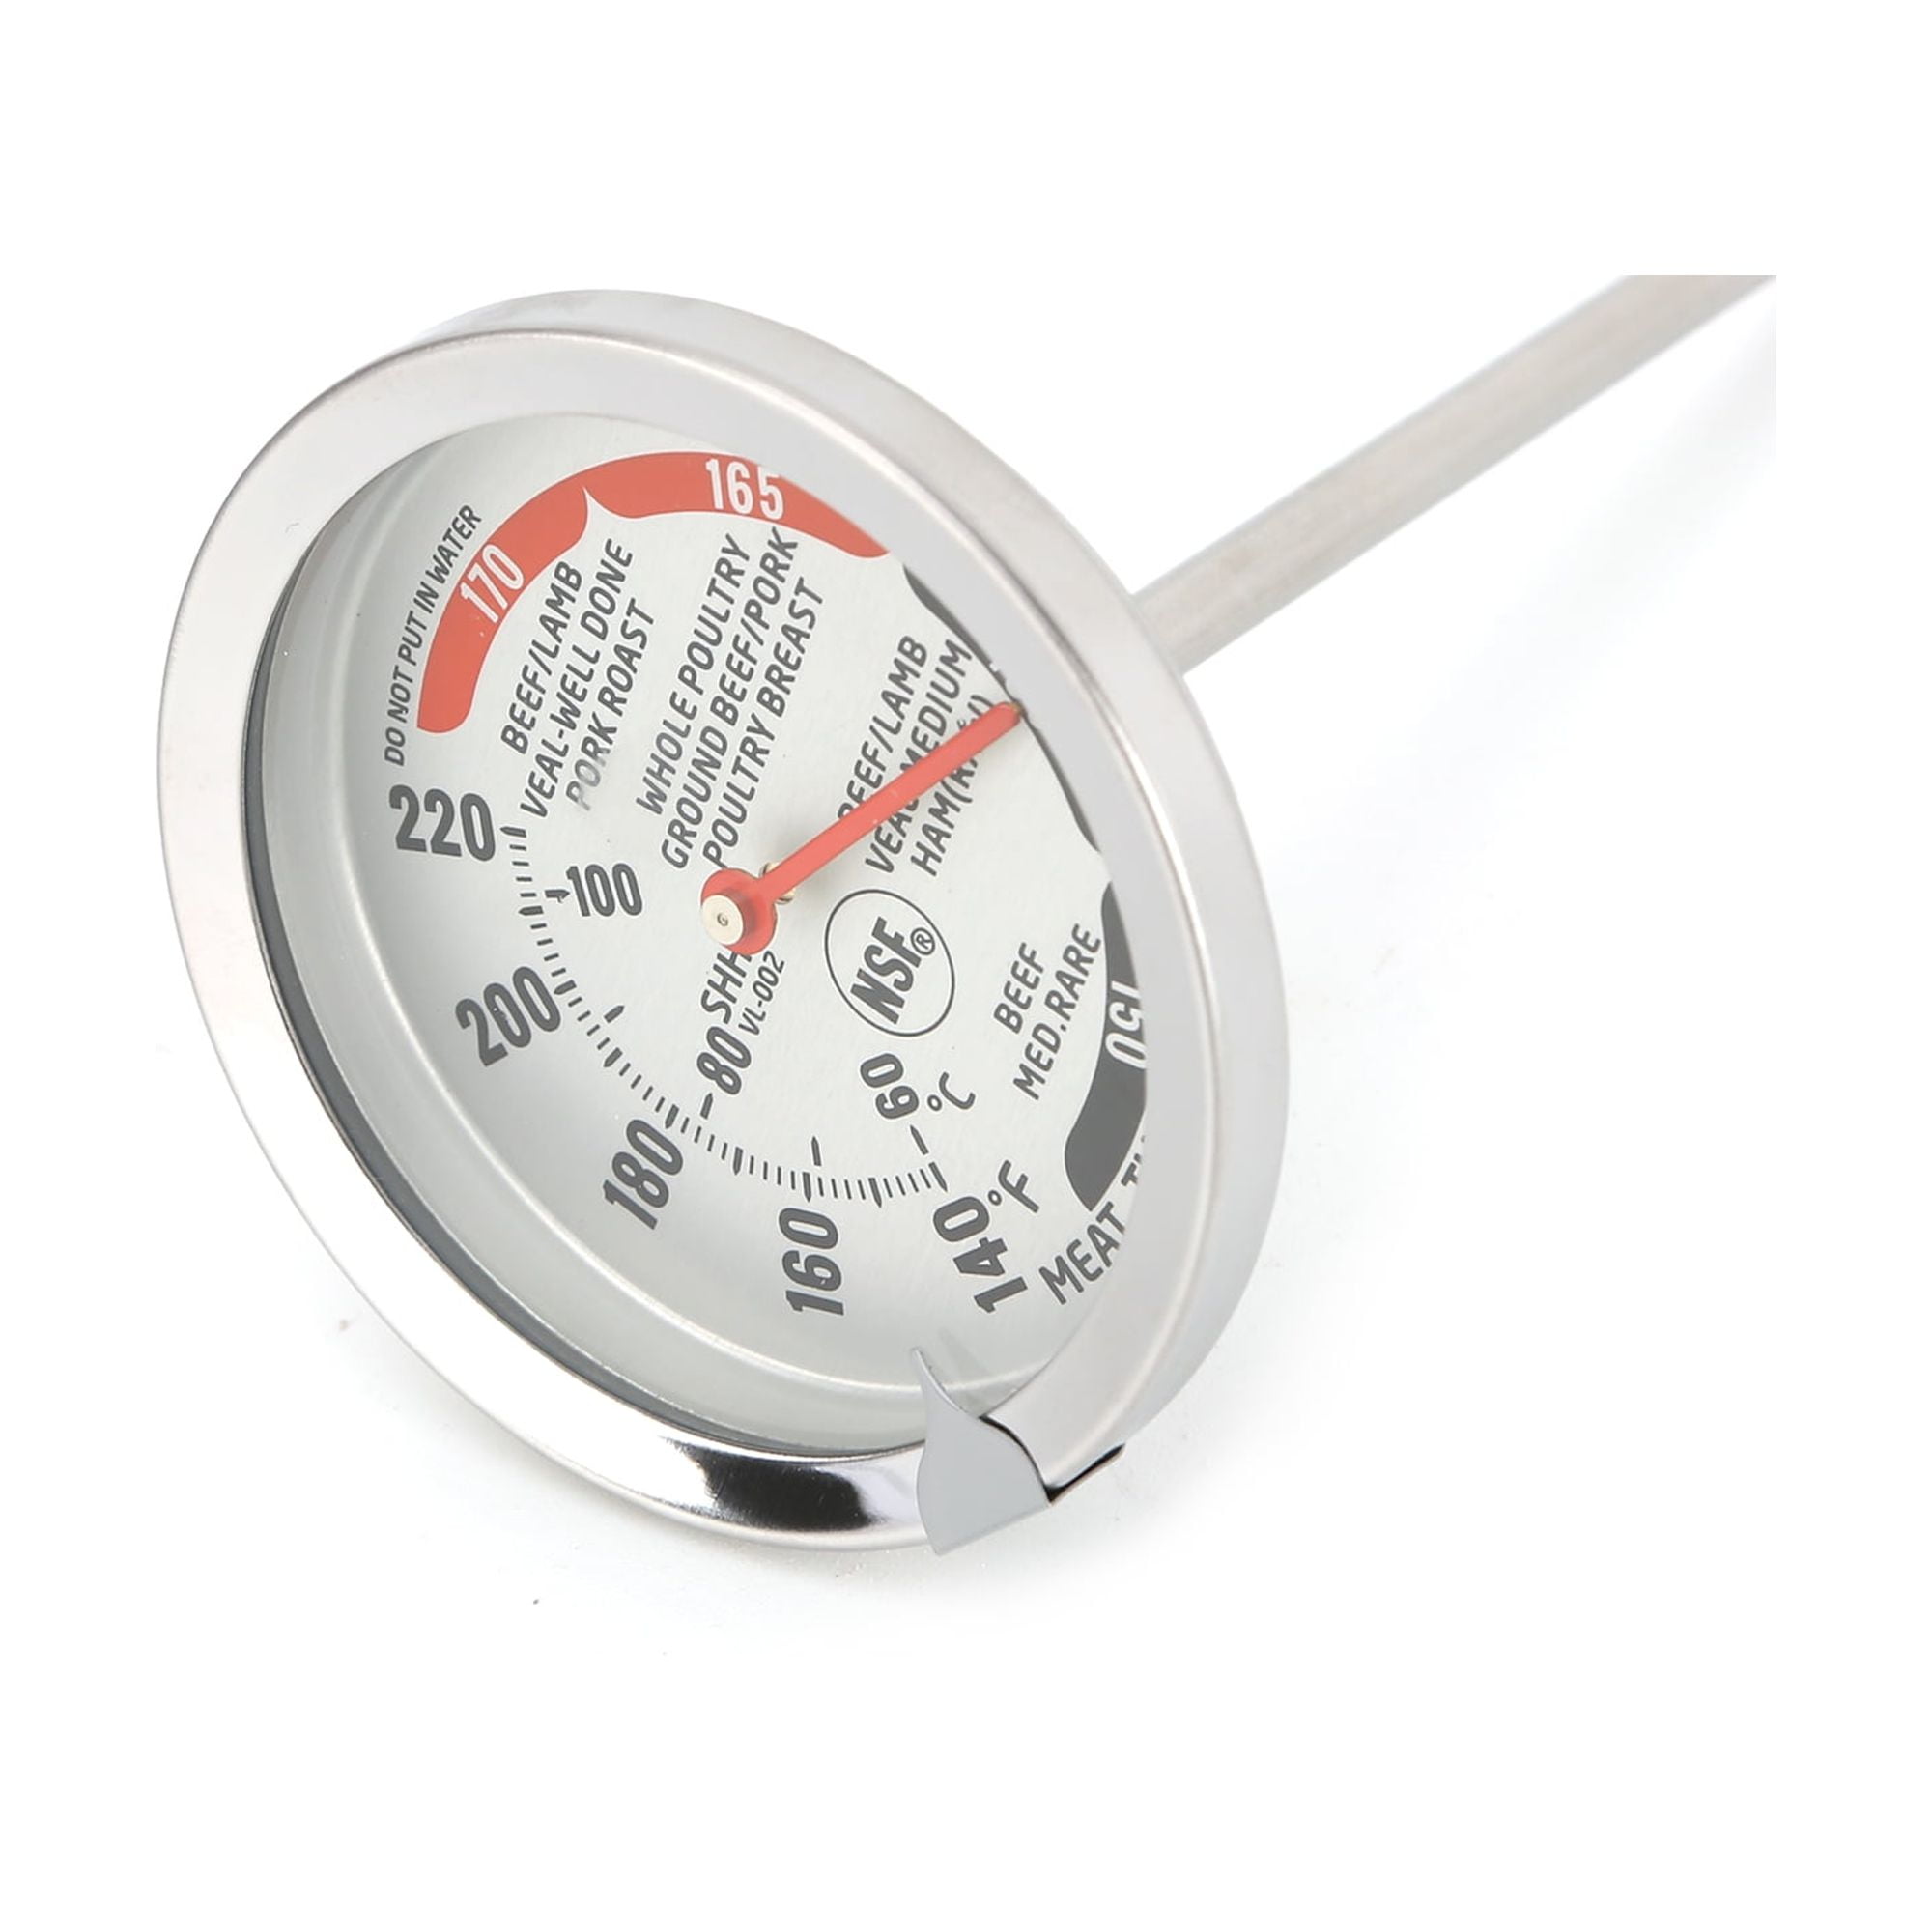  Mainstays NSF Certified Oven Safe Meat Thermometer, Extra Large  Dial, Silver: Home & Kitchen